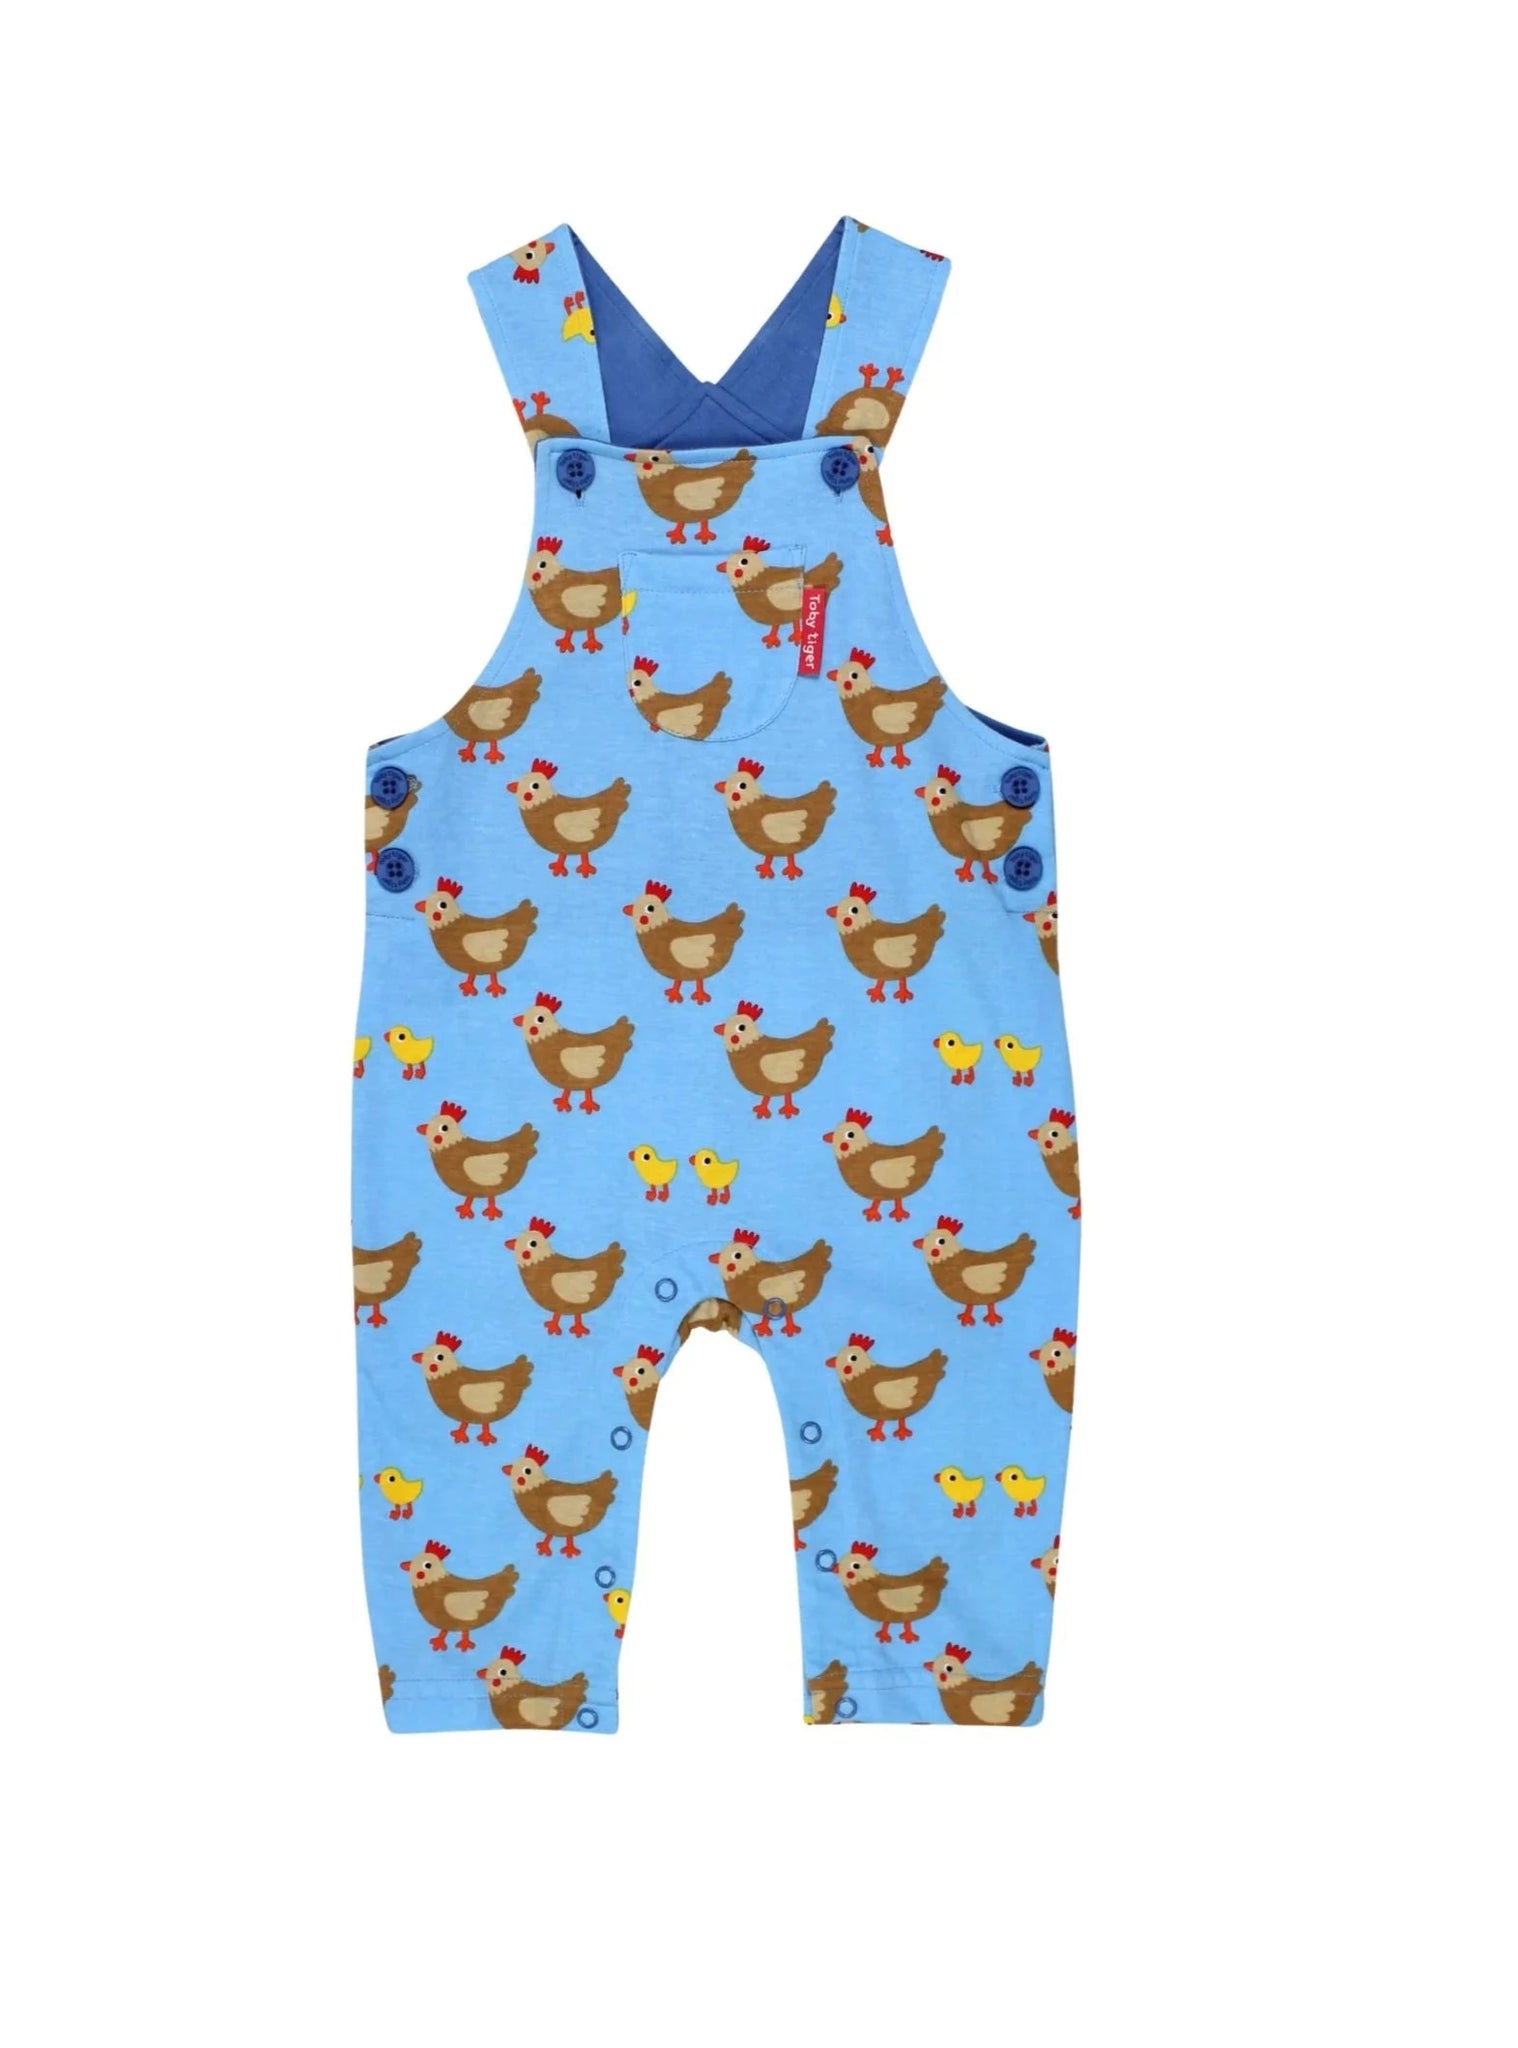 blue sleeveless overalls/dungarees with chickens and chick print all over